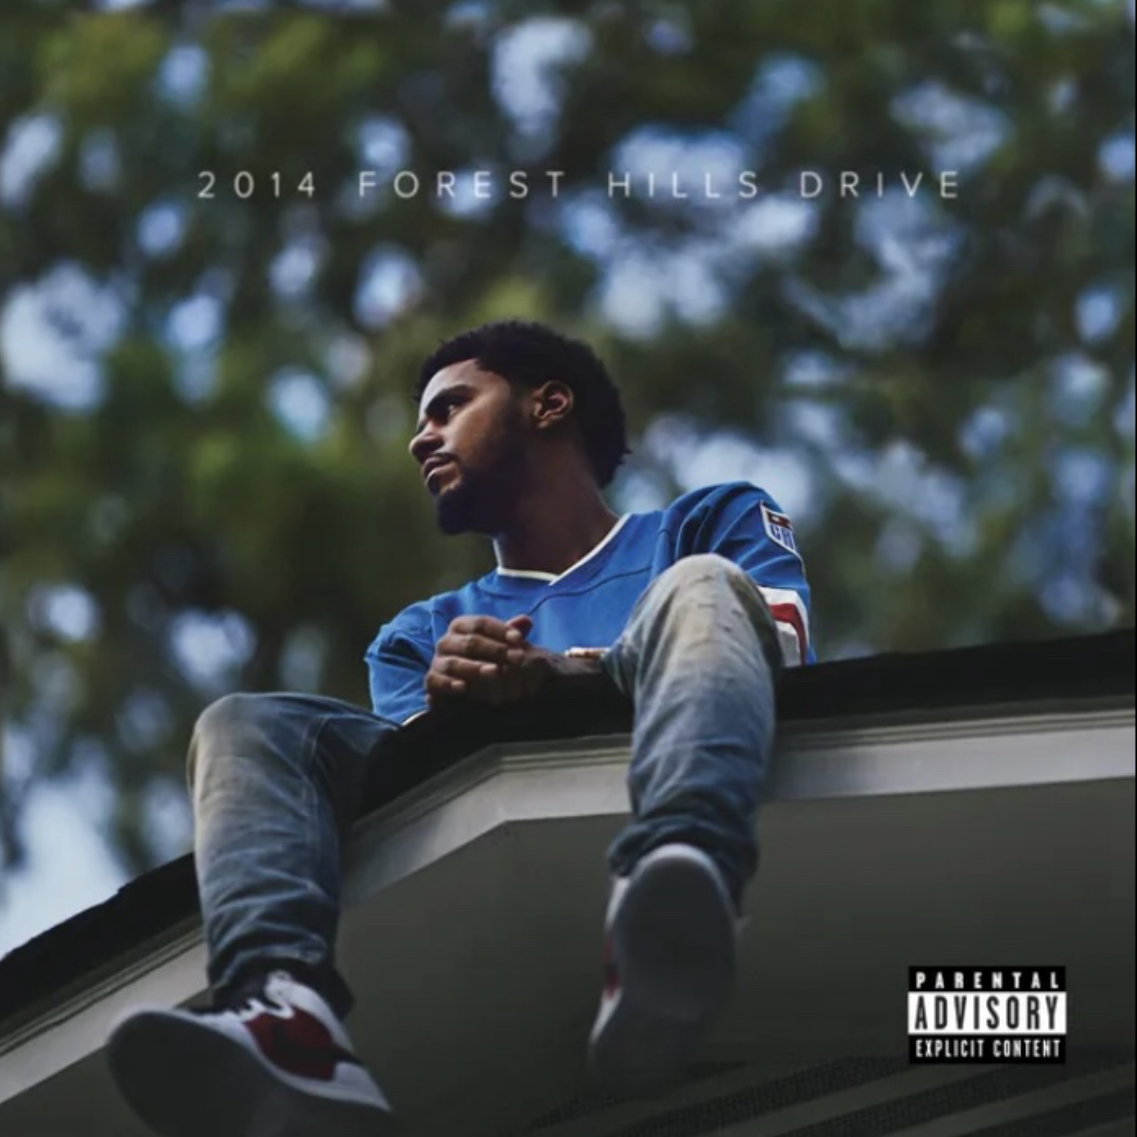 The album “2014 Forest Hills Drive” is named after Coles childhood address as a way of closure.